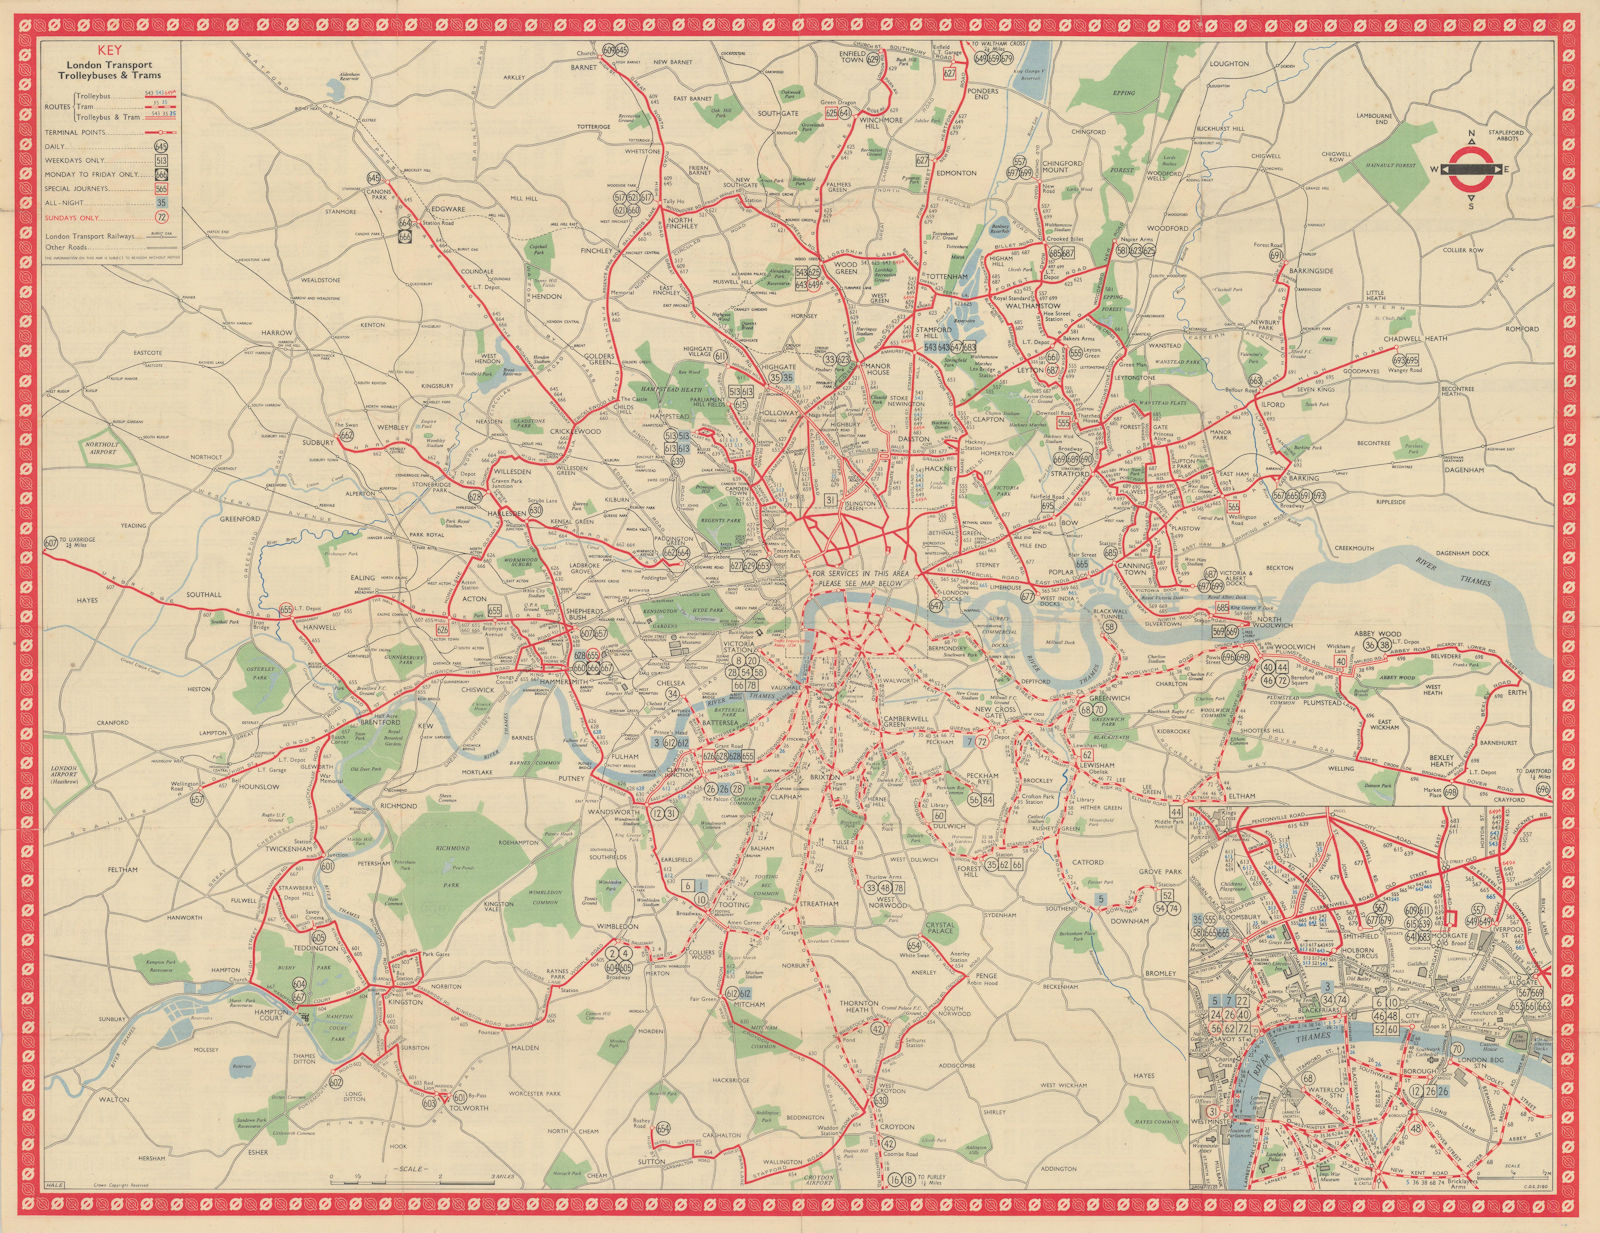 Associate Product London Transport Trolleybus & Tram route map 1149. HALE January 1950 old